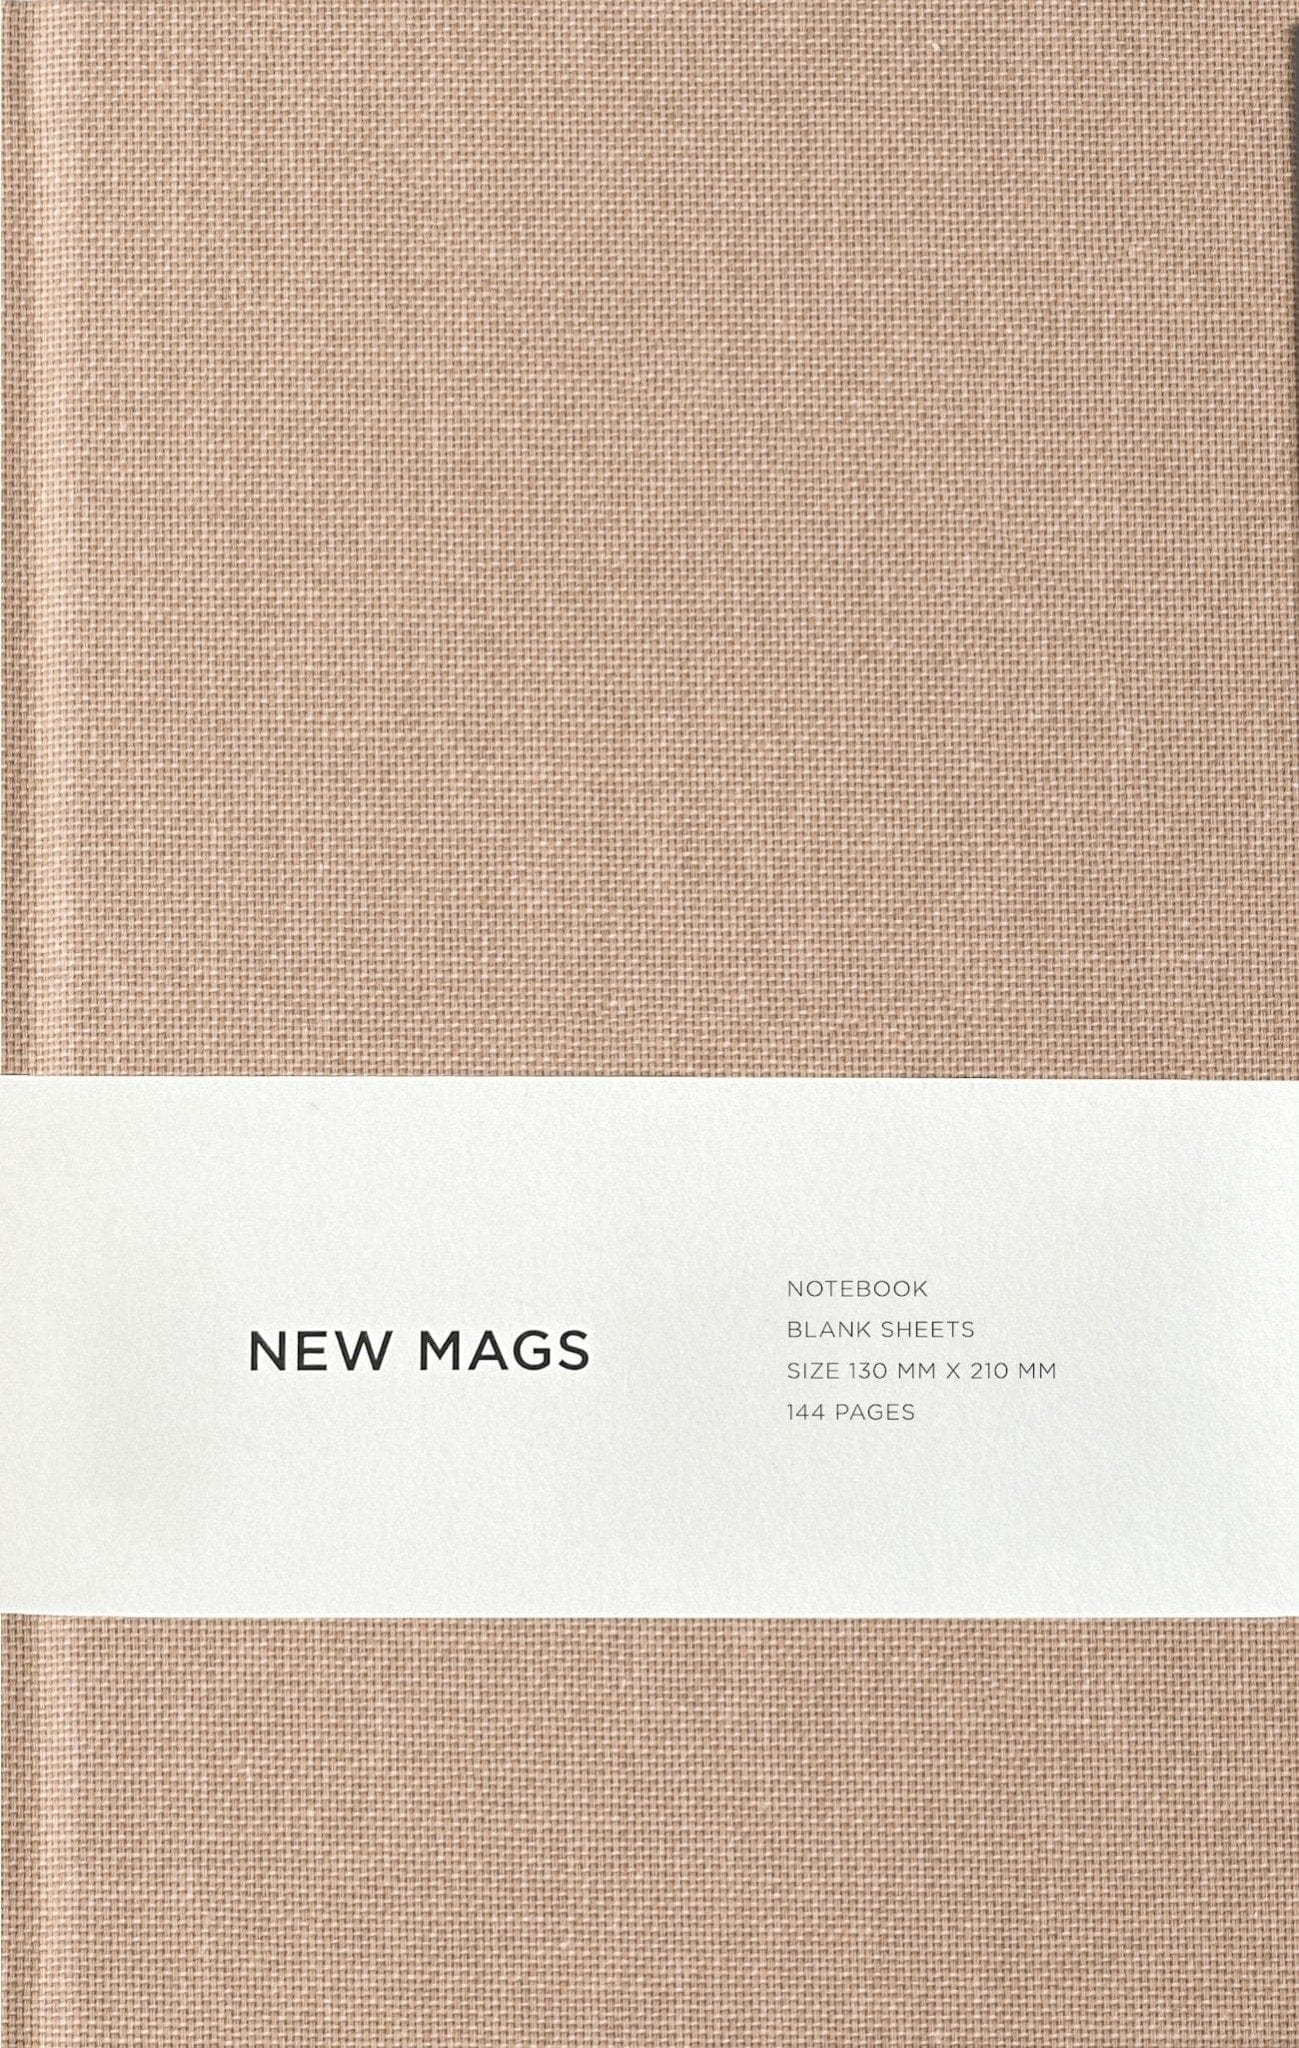 NewMags Agenda Notebook Sand - Hardcover/Blank, in Limba Engleza